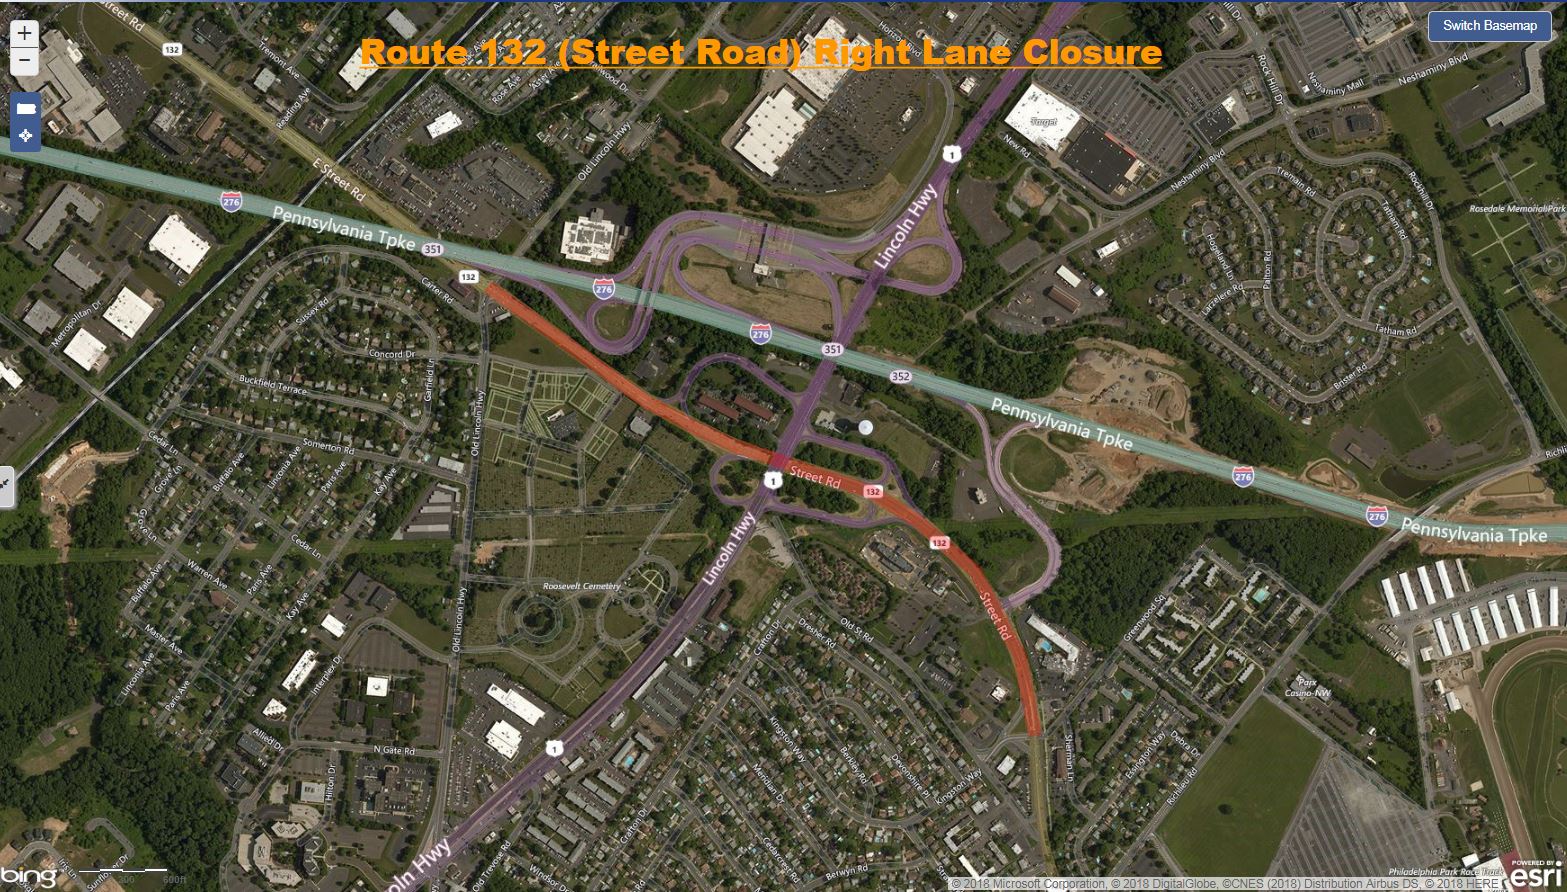 Route 132 Right Lane CLosure Kingston to Old Lincoln.JPG